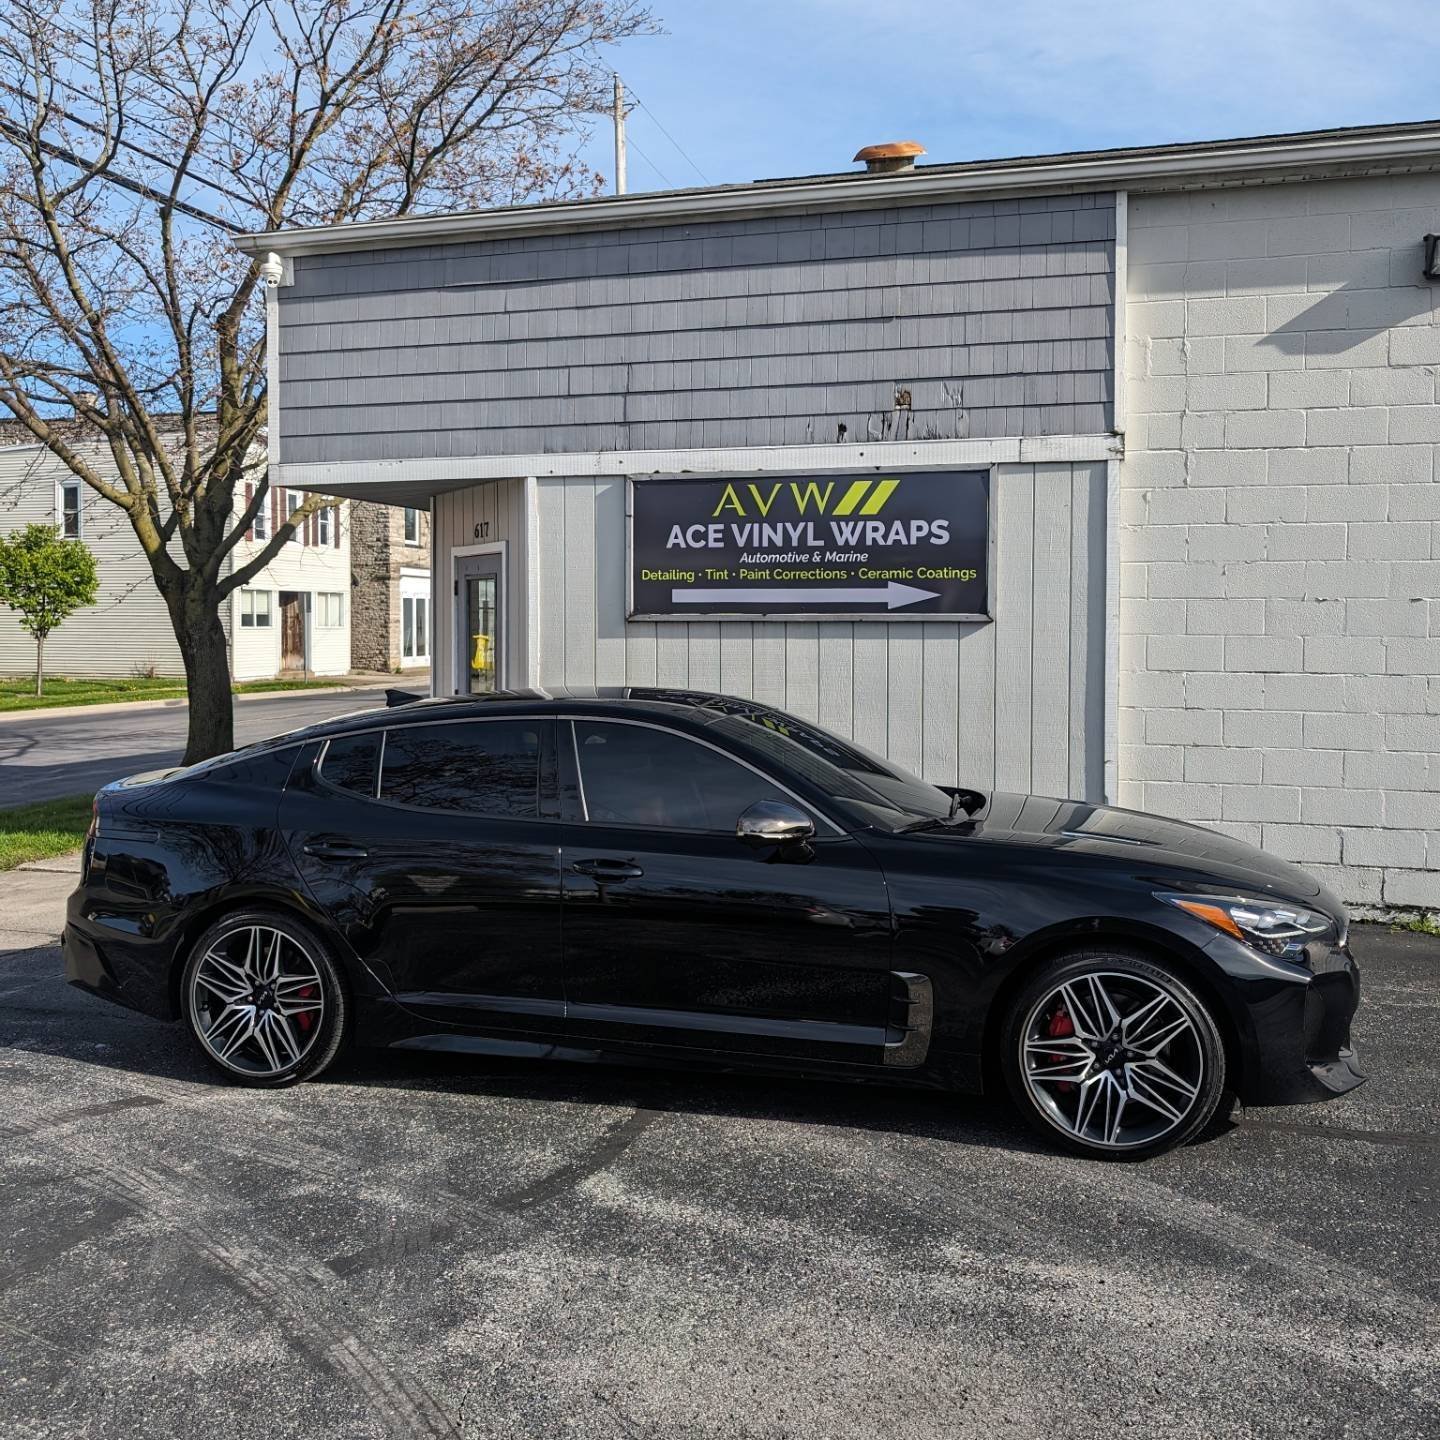 2022 Kia Stinger GT2 AWD

Hitek Carbon IR 15% applied to roll downs and rear
Hitek Carbon 50% applied to front windshield
Side marker's wrapped in gloss black

419-202-1513  Text OR Call us
www.acevinylwraps.com
acevinylwrapsdetailing@gmail.com
Faceb